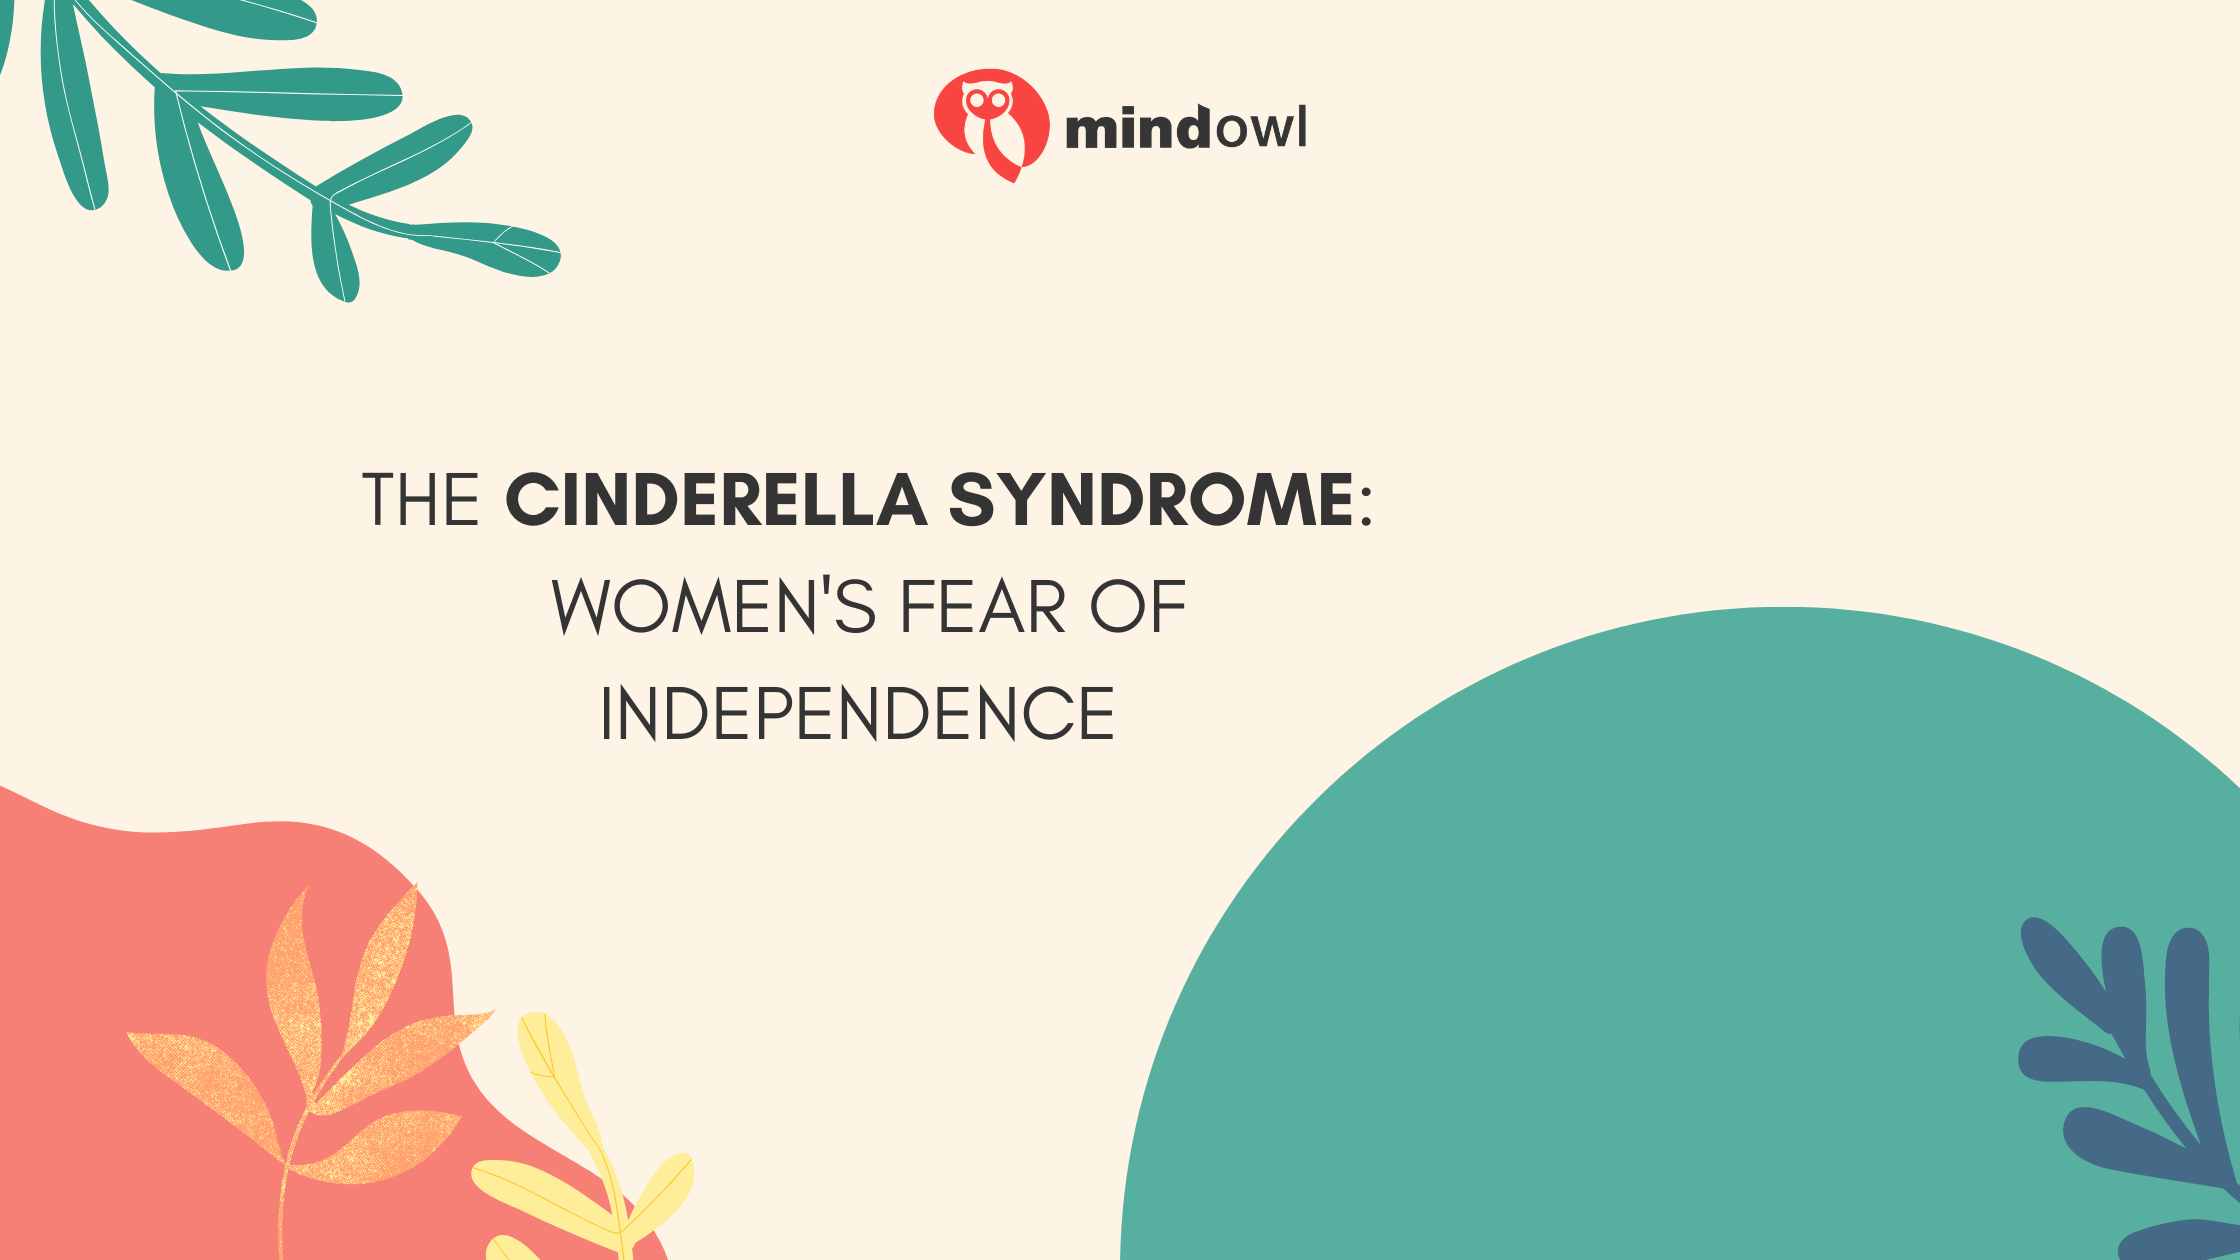 The Cinderella Syndrome: Women’s Fear of Independence